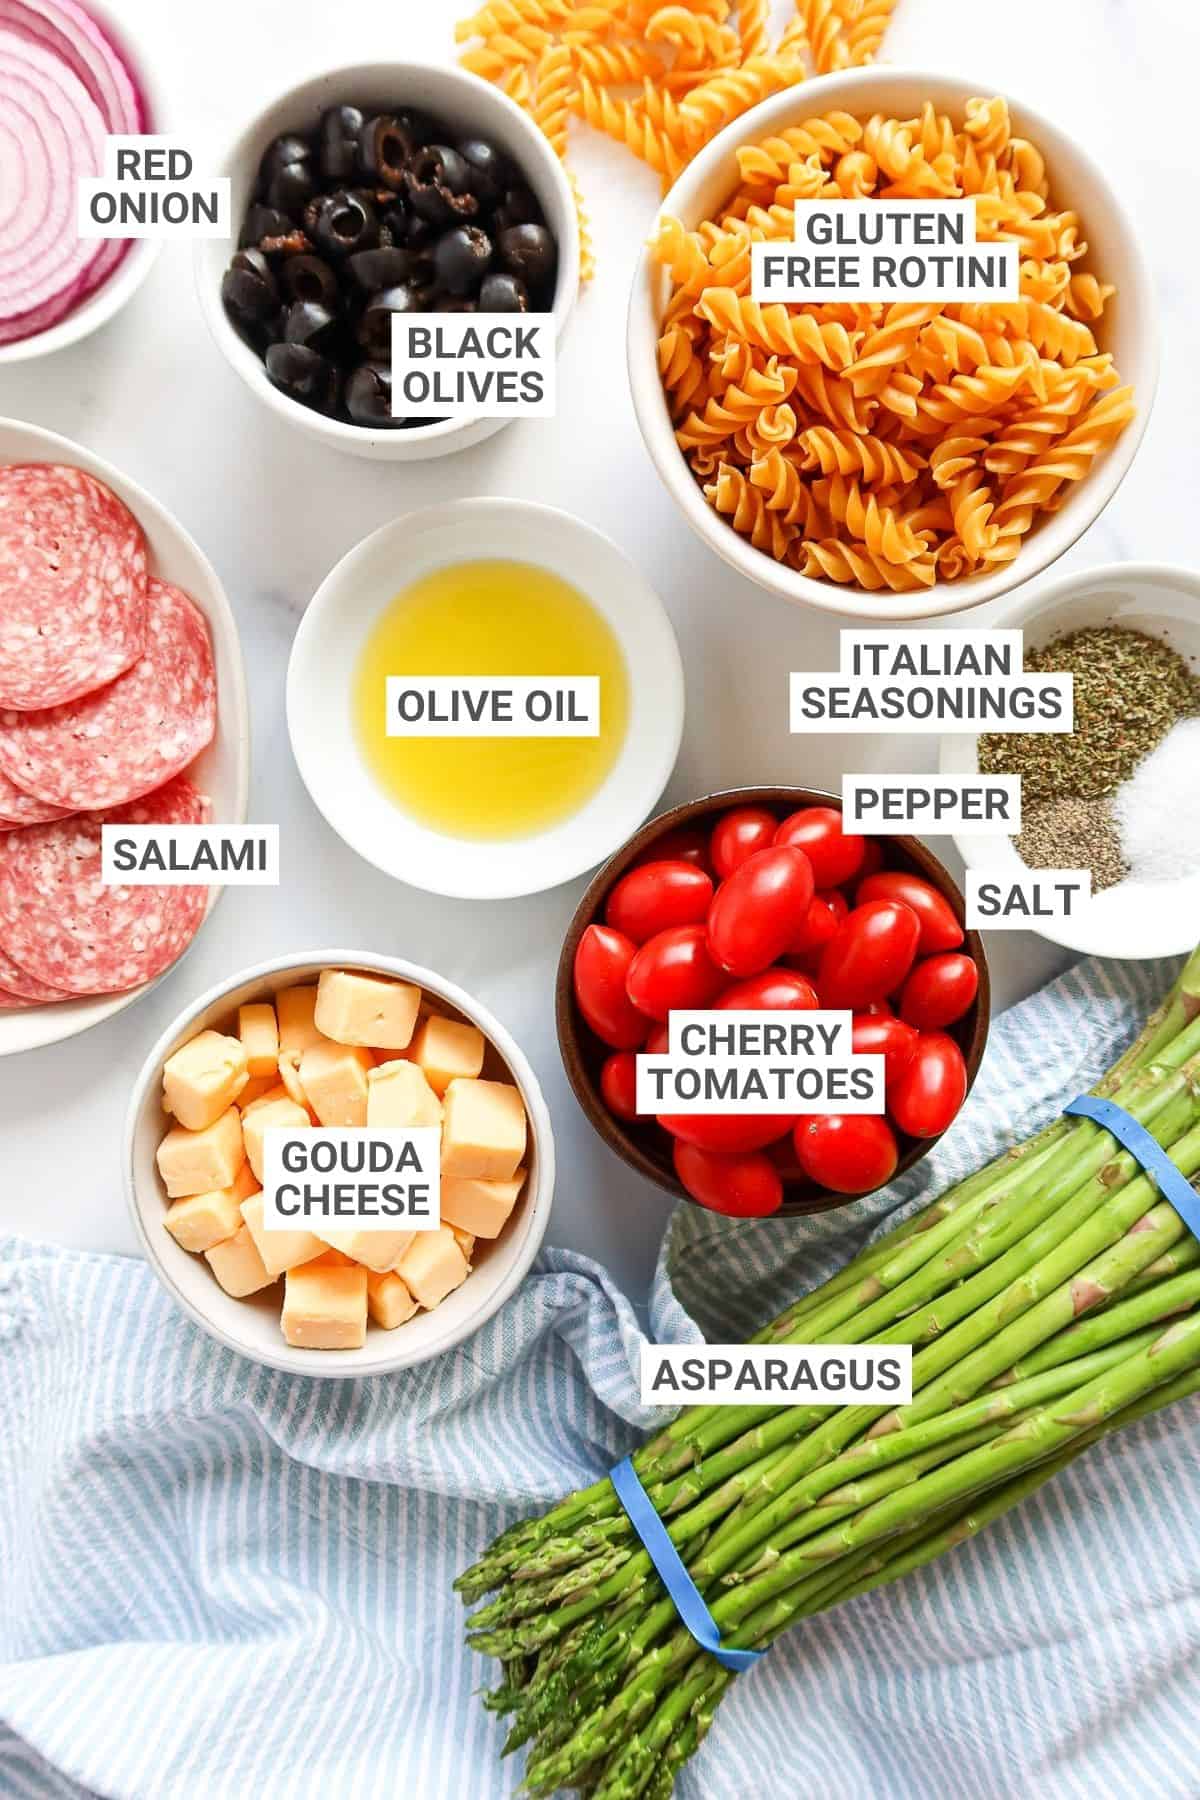 Asparagus pasta salad ingredients arranged on a countertop with text overlay labels.